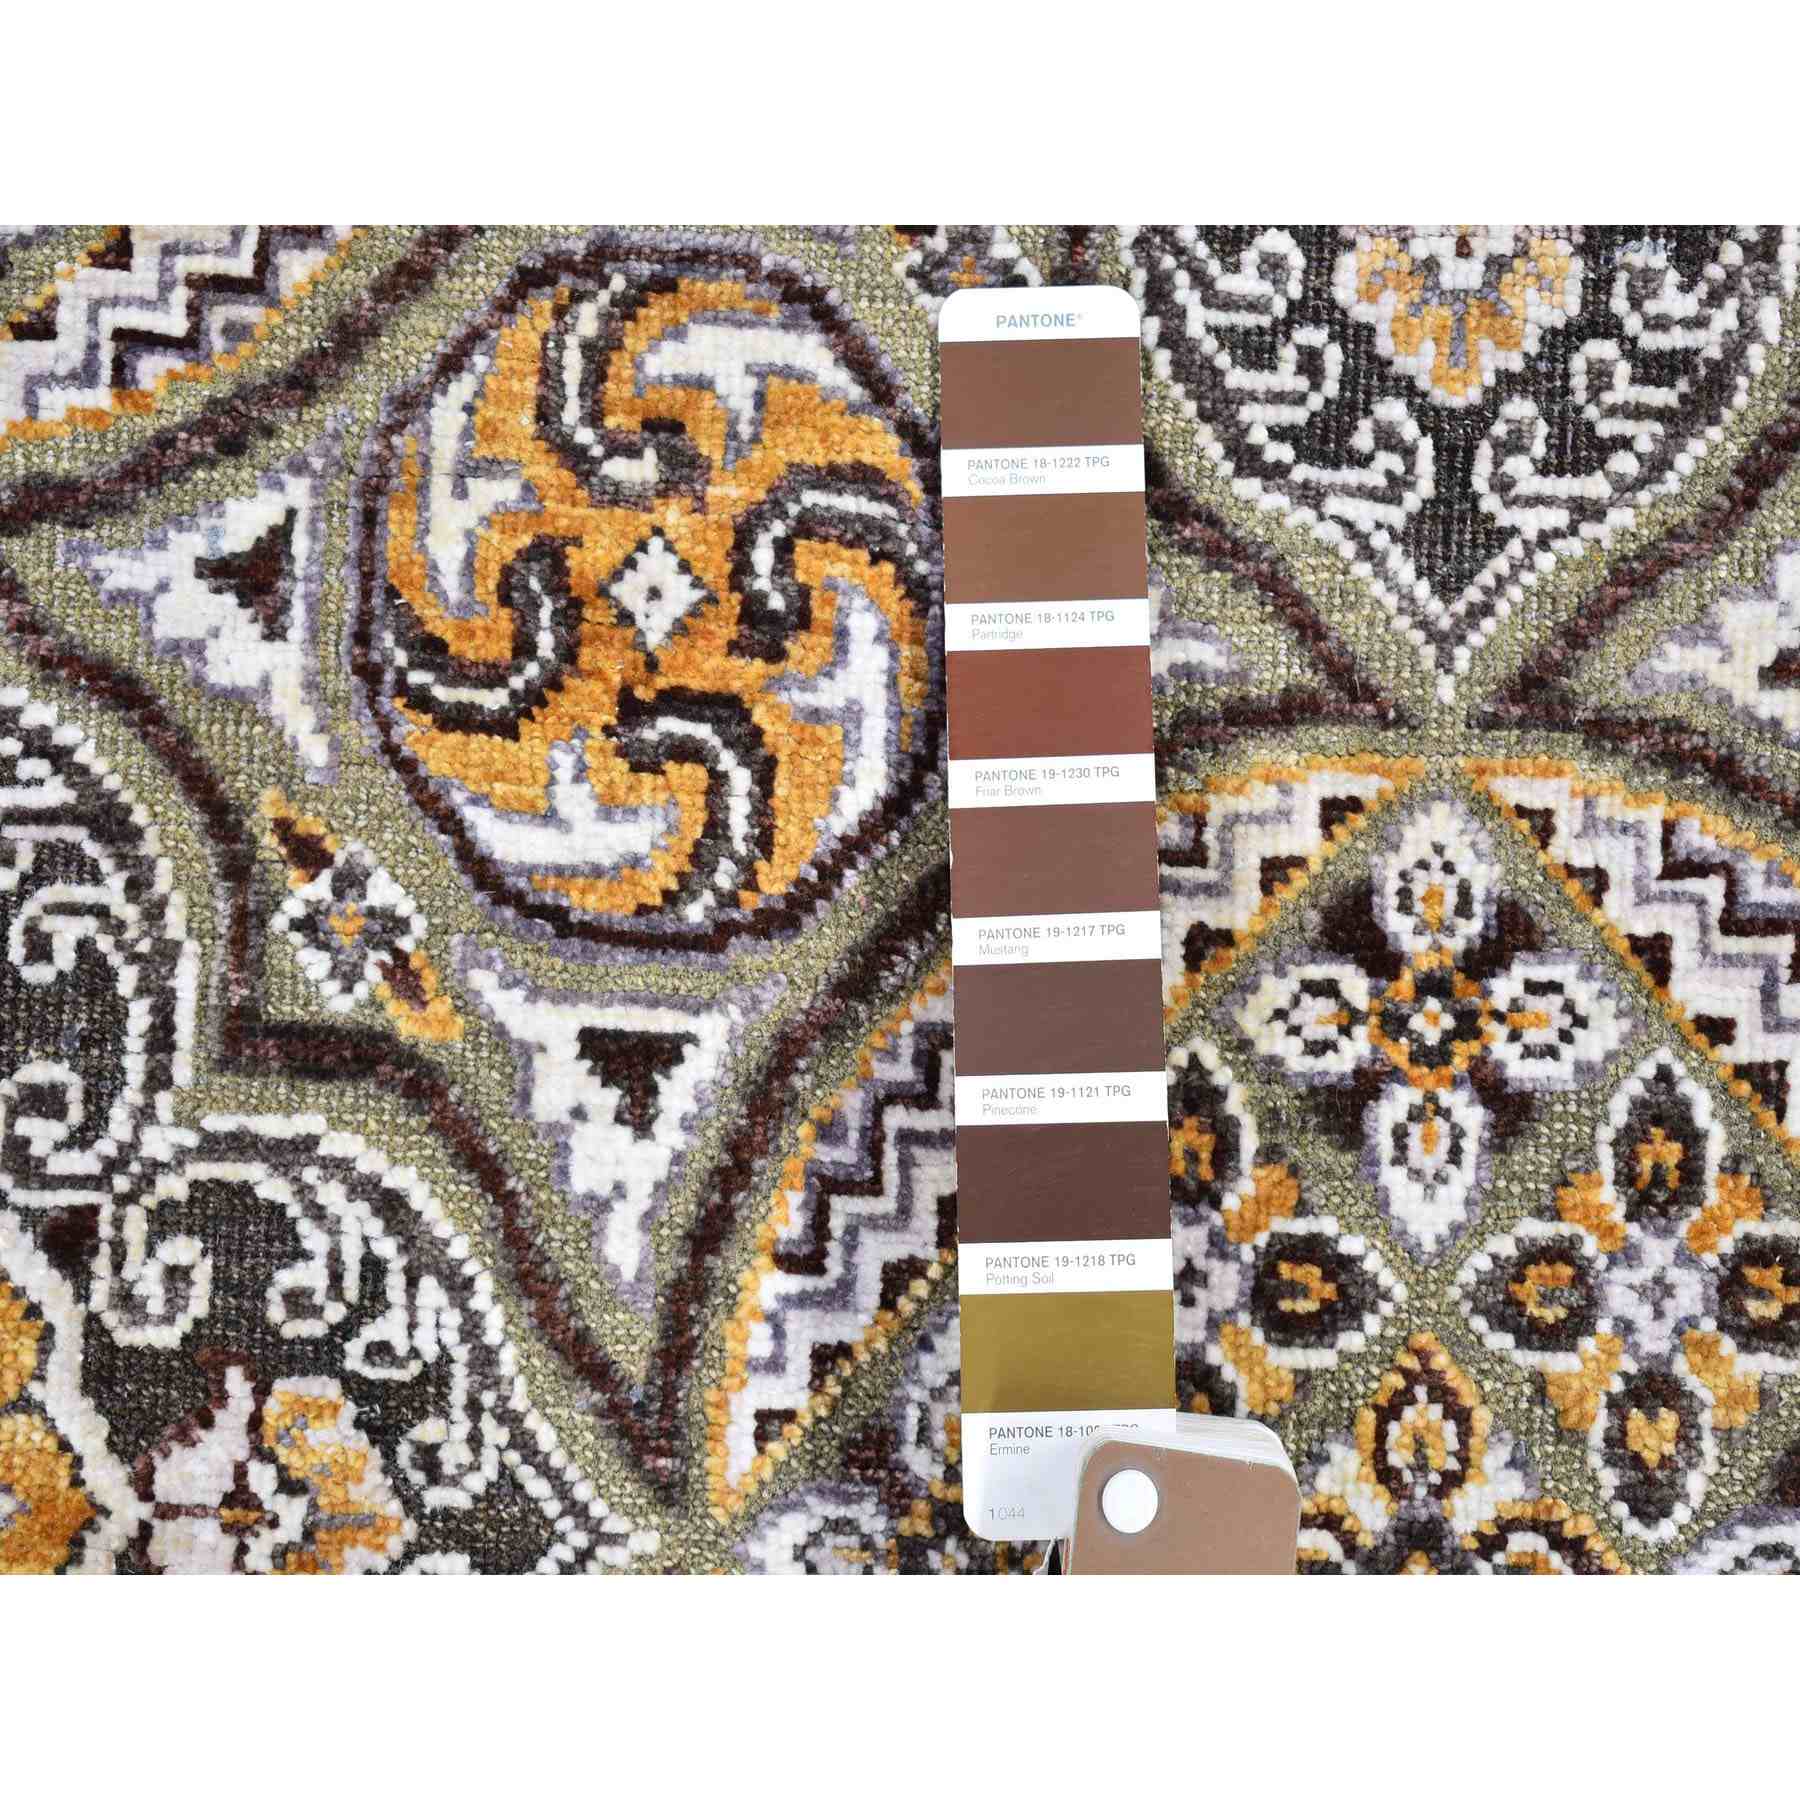 Transitional-Hand-Knotted-Rug-333615